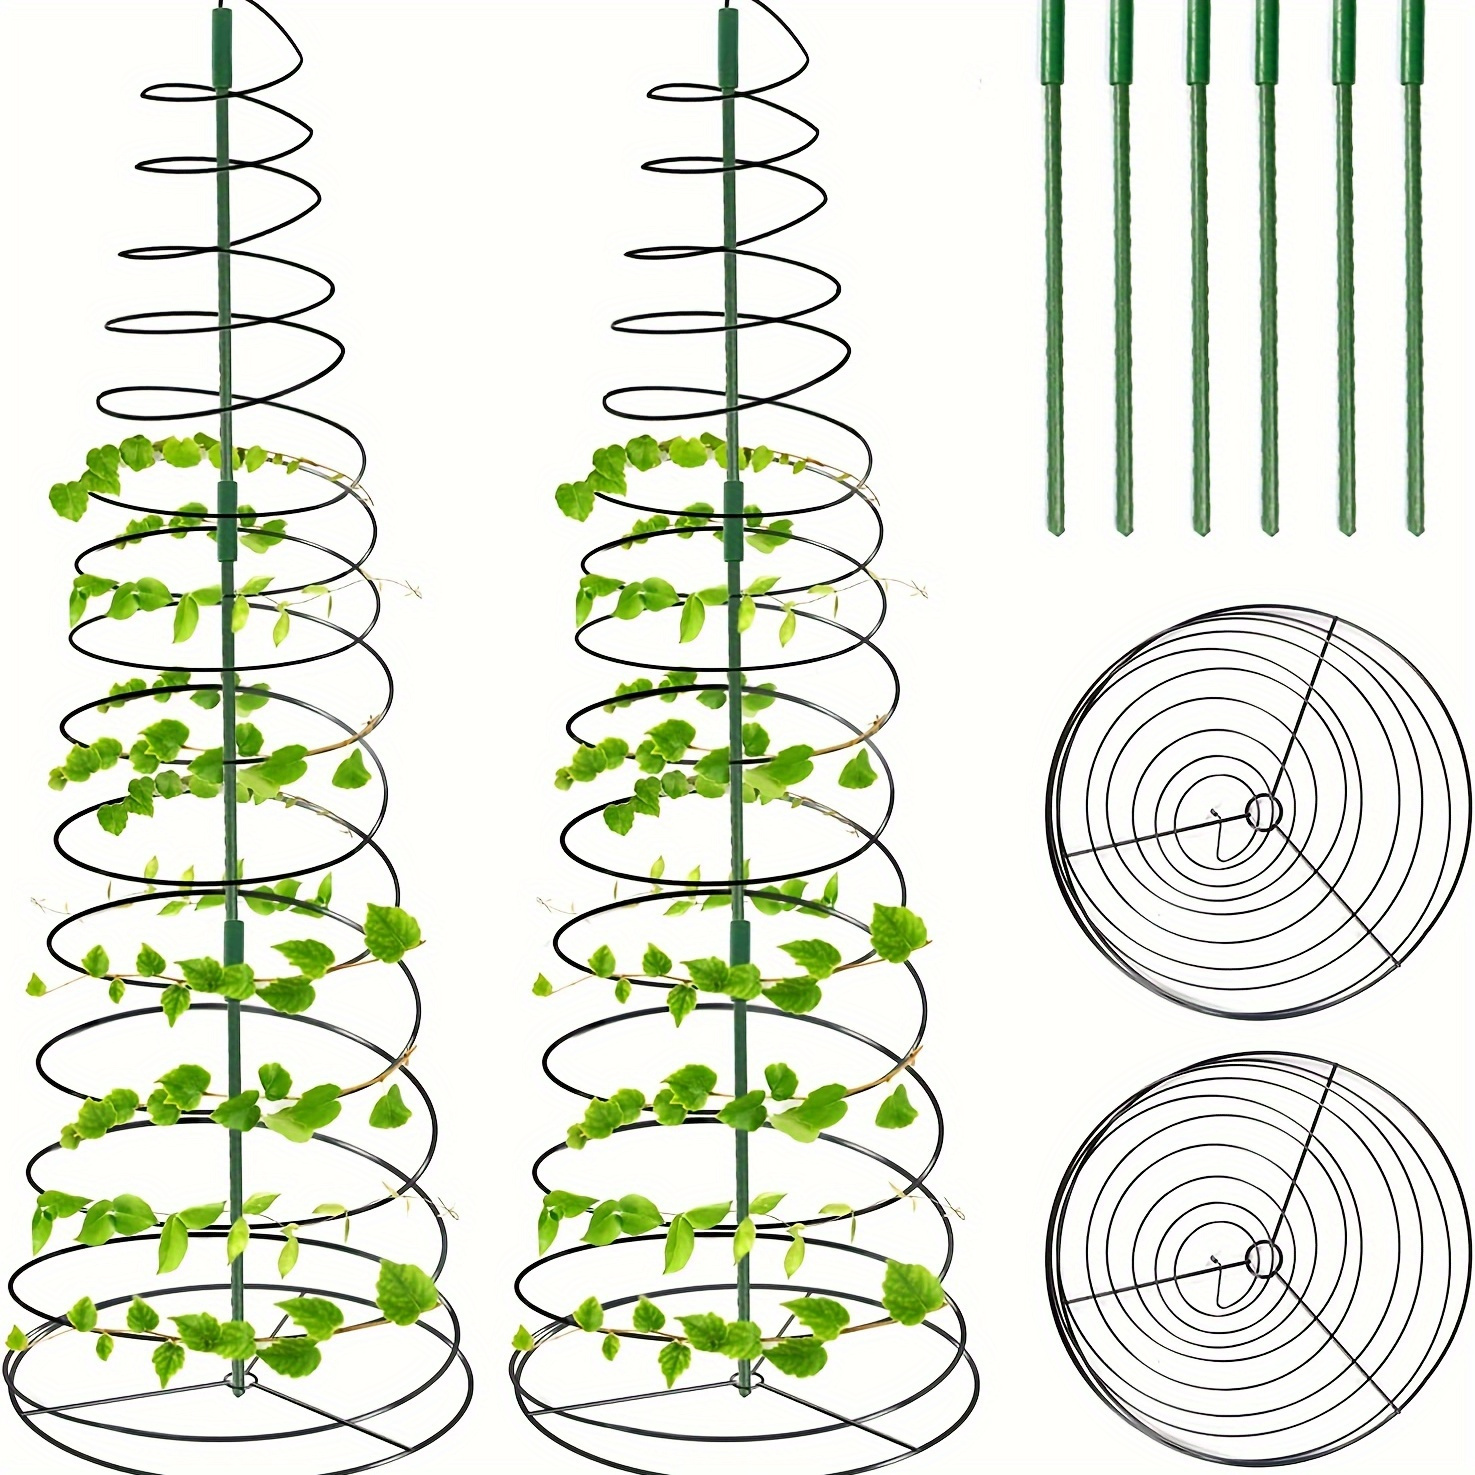 

2pcs Pea Trellis Green Bean Trellis For Garden - Sugar Snap Tower Stretchable To 53.6 In With Poles, Metal Climbing Plant Growing Cage Support For Cucumber Vine Vegetable Indoor Outdoor